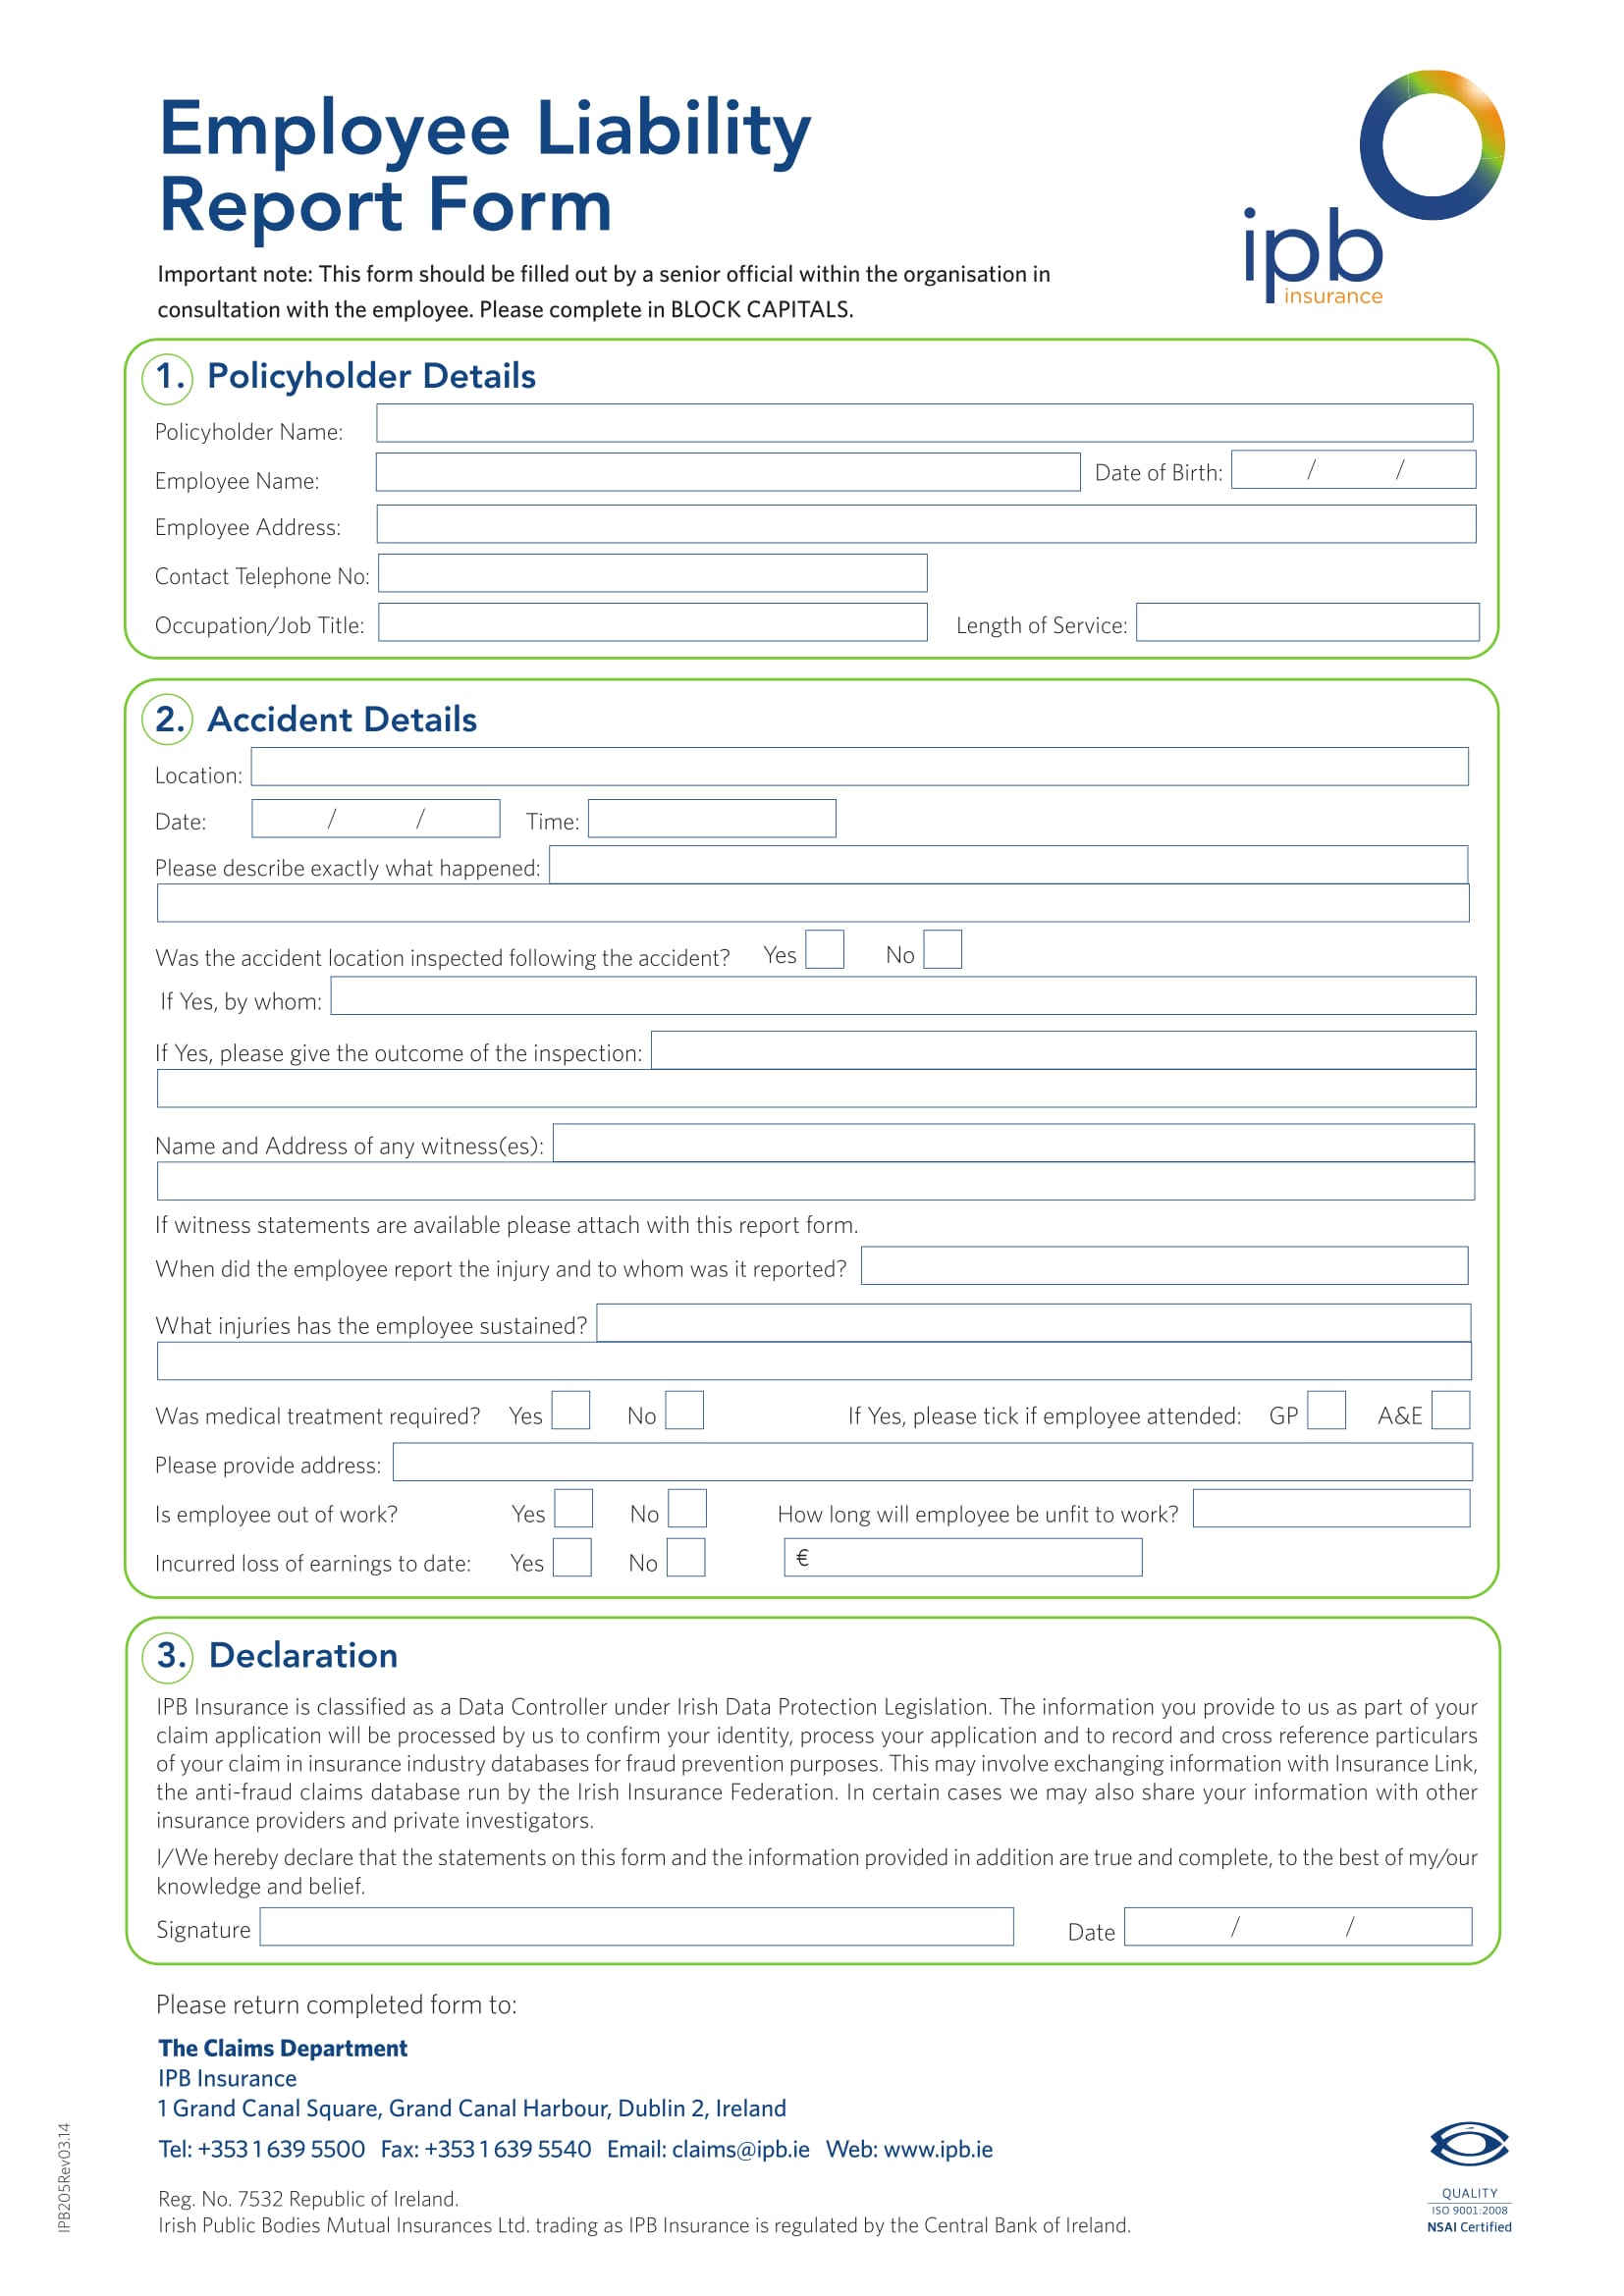 employee liability report form 1